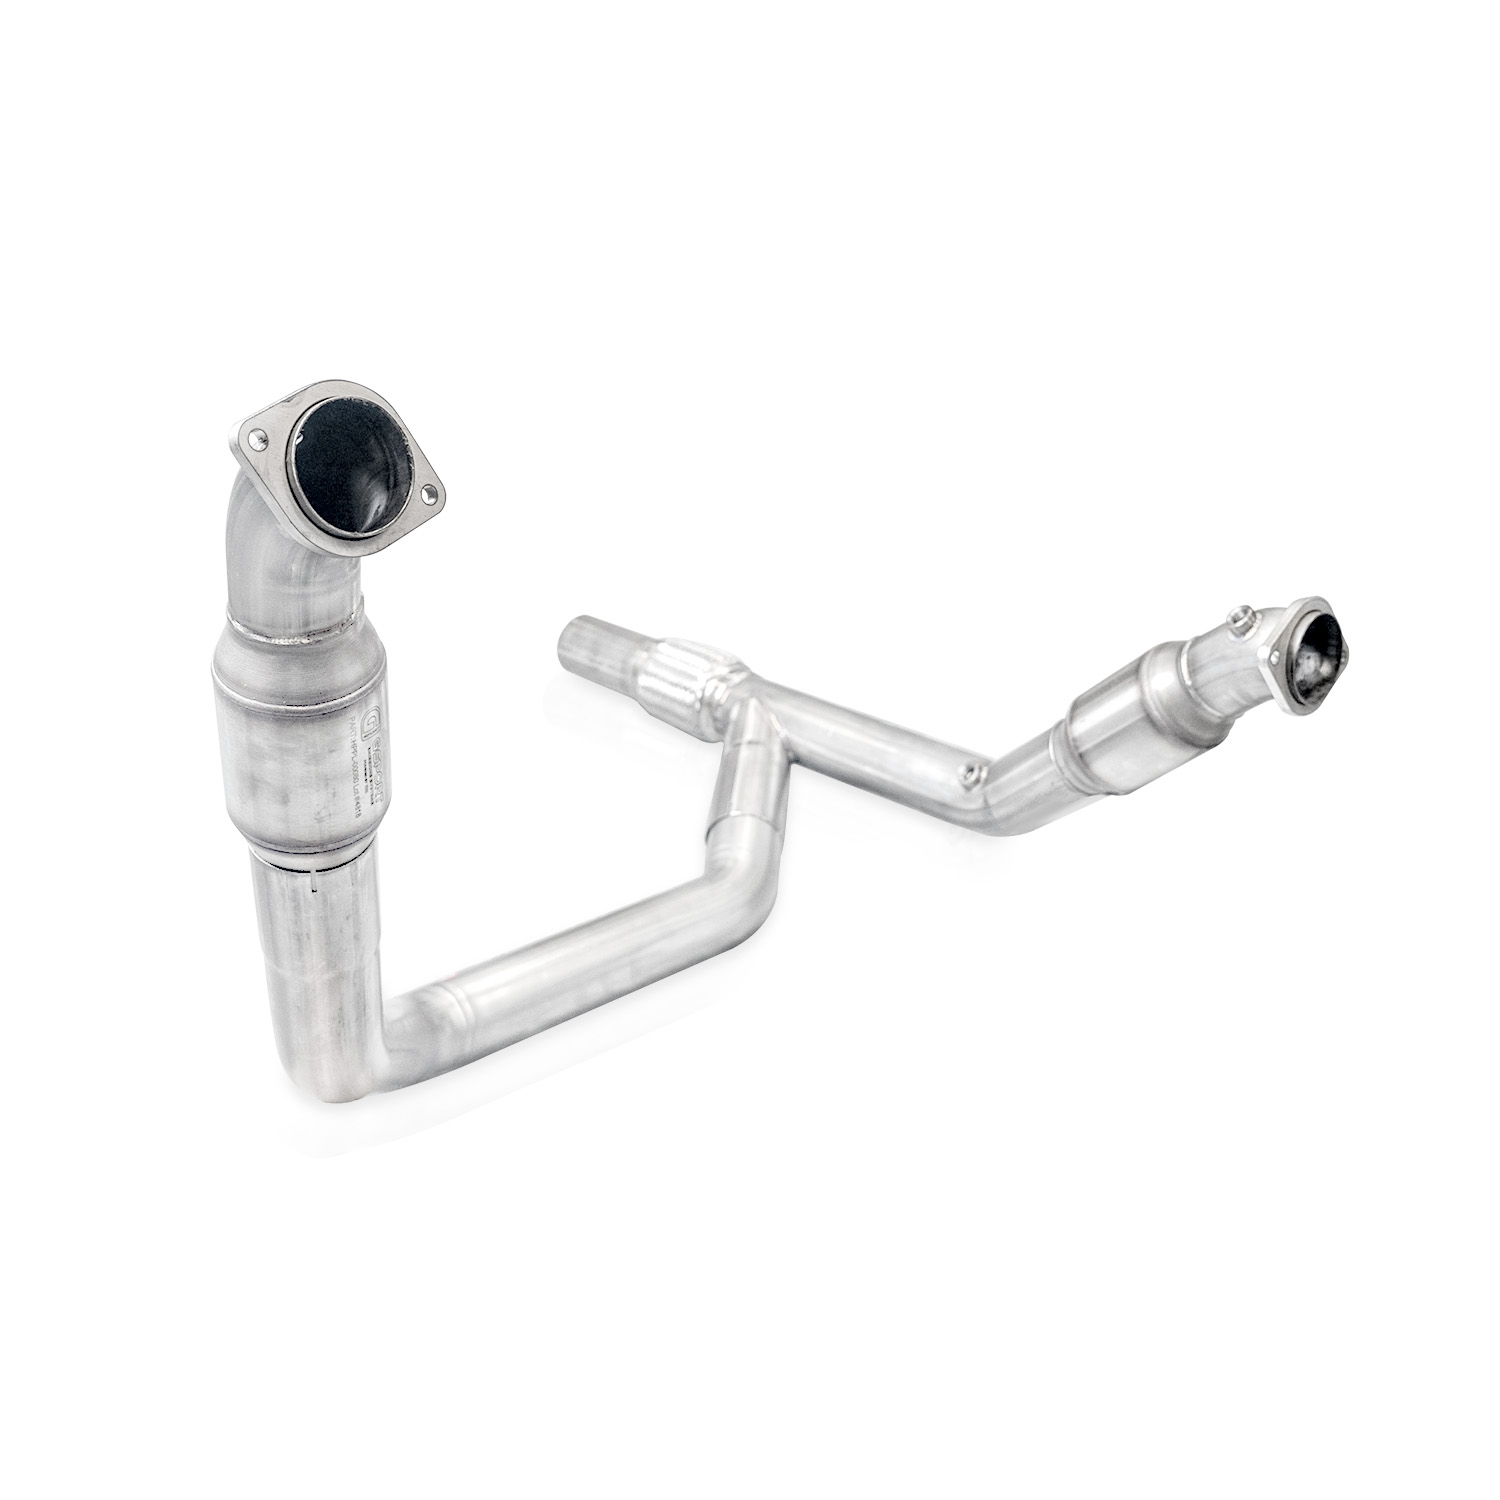 Ford Bronco Stainless Works Downpipe Now Available at Panda Motorworks fbrdpcat-1-primary__27687